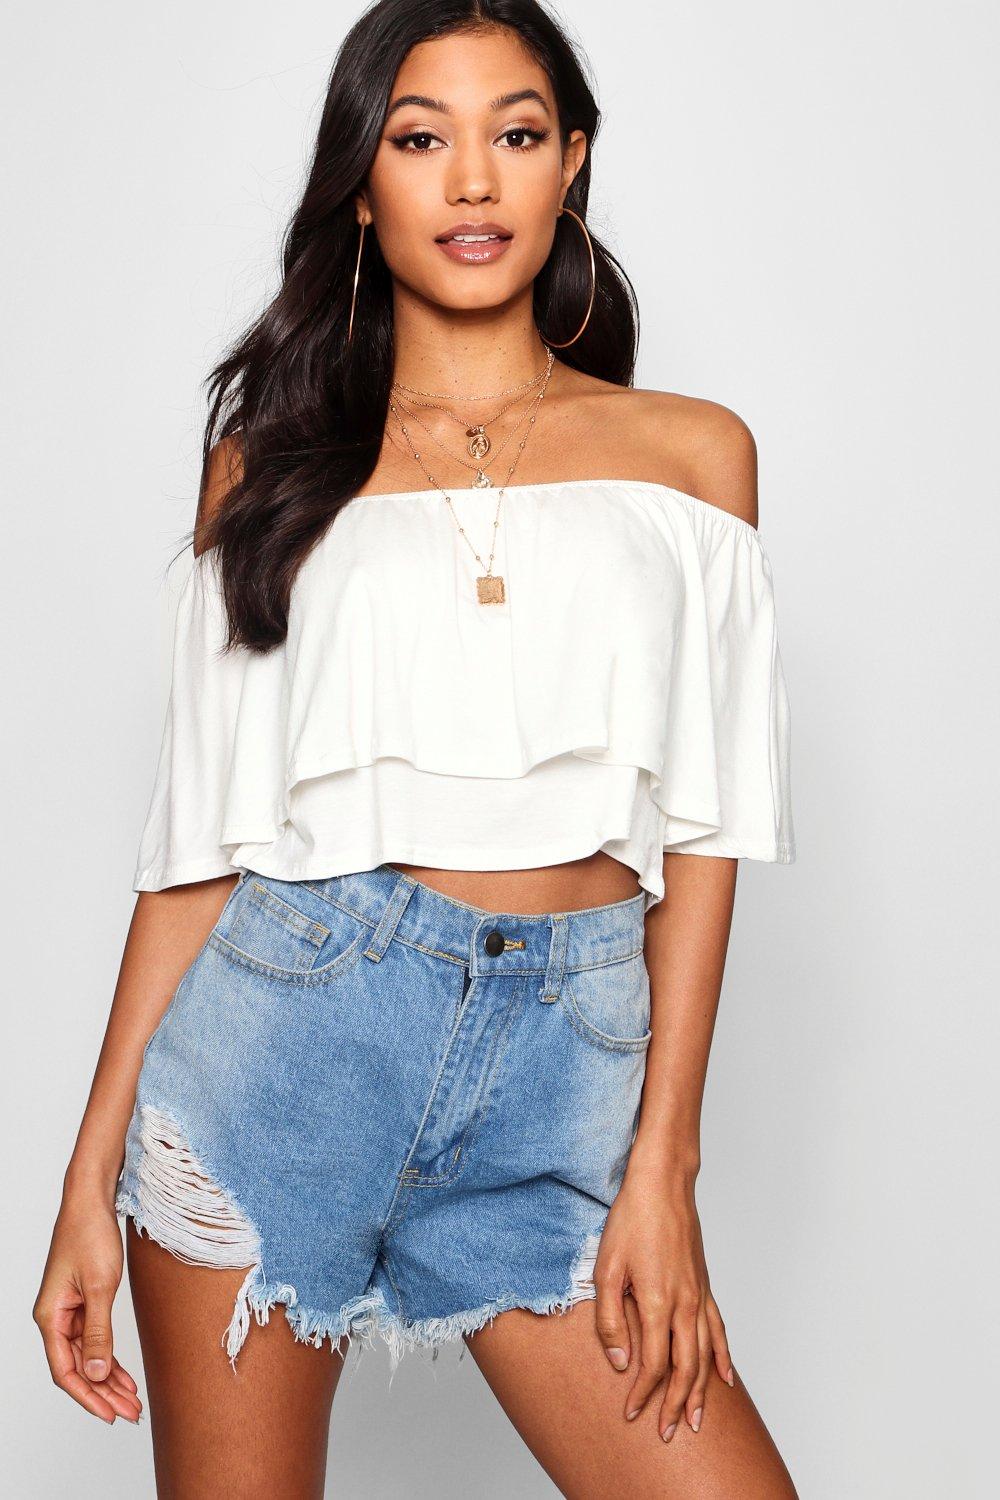 Most Stylish Crop Tops for summer of 2017 - Fashion Blogs - Fashion ...